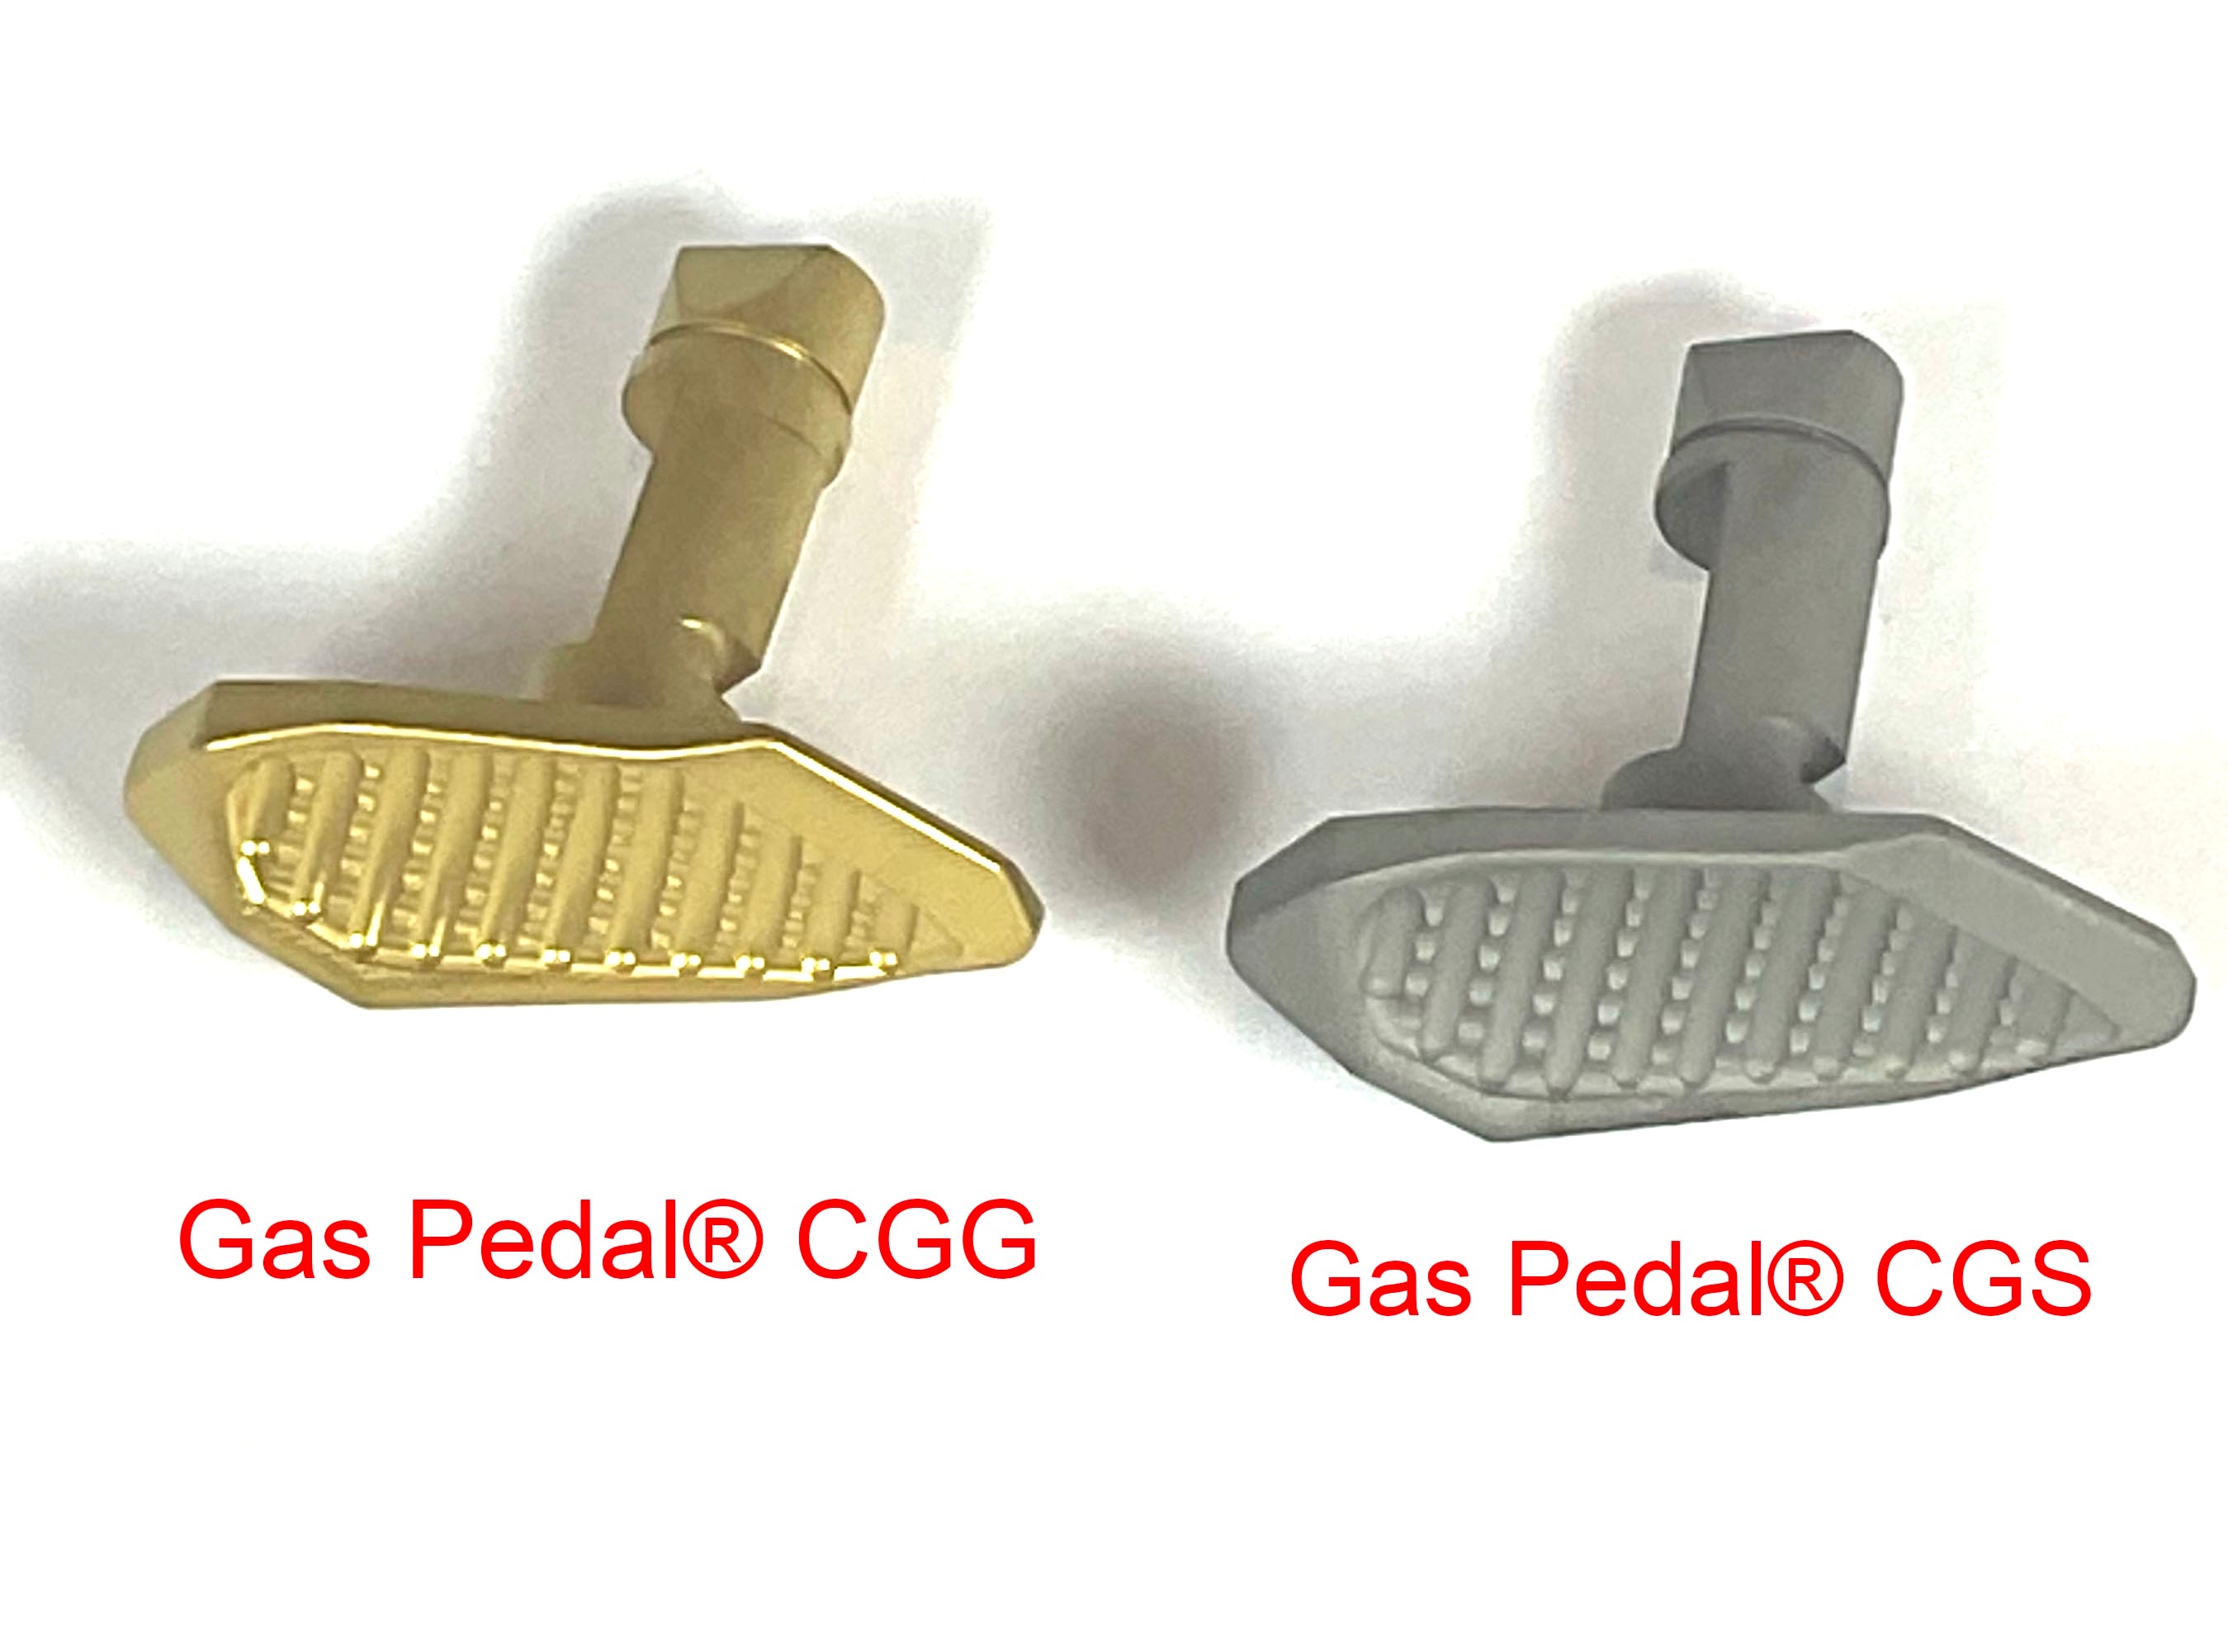 Gas Pedal® CG Gold and Grey for Sig P320